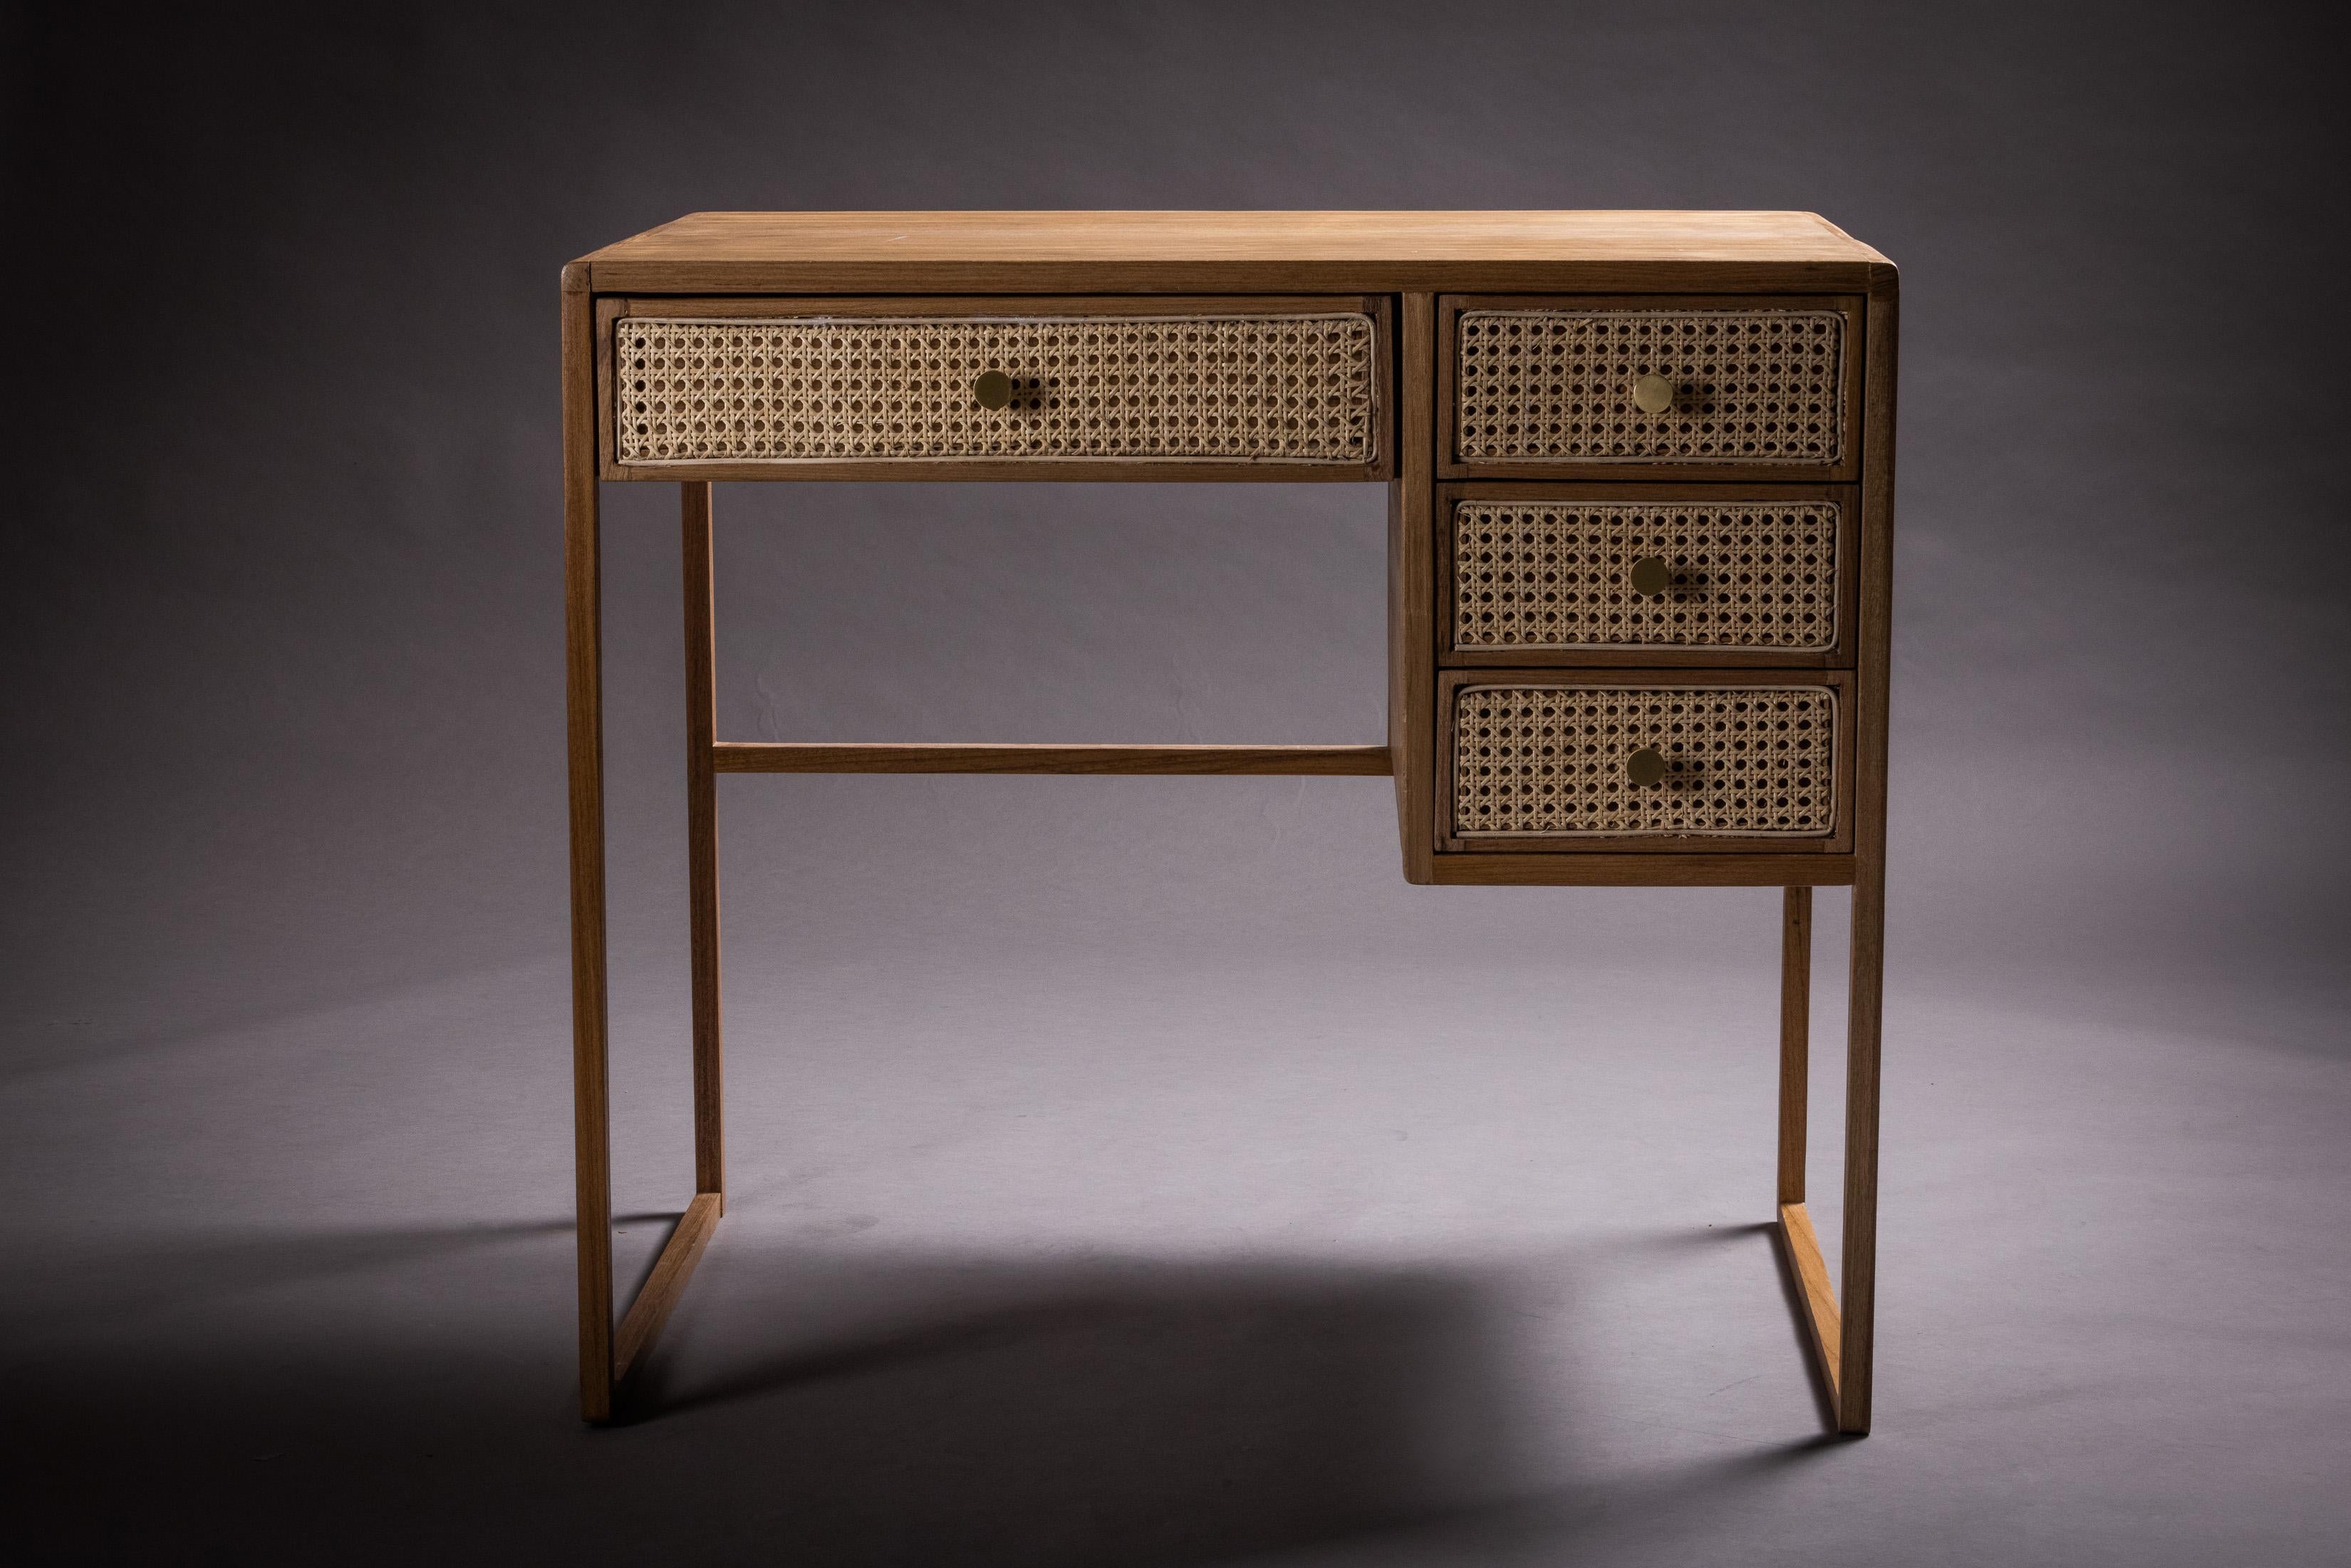 The Chiquita writing desk features smooth and delicate lines, with 4 drawers featuring fronts made of natural wicker and brass handles that impart a nostalgic and romantic feel to the design. It can be crafted in freijó or jequitibá wood.

The